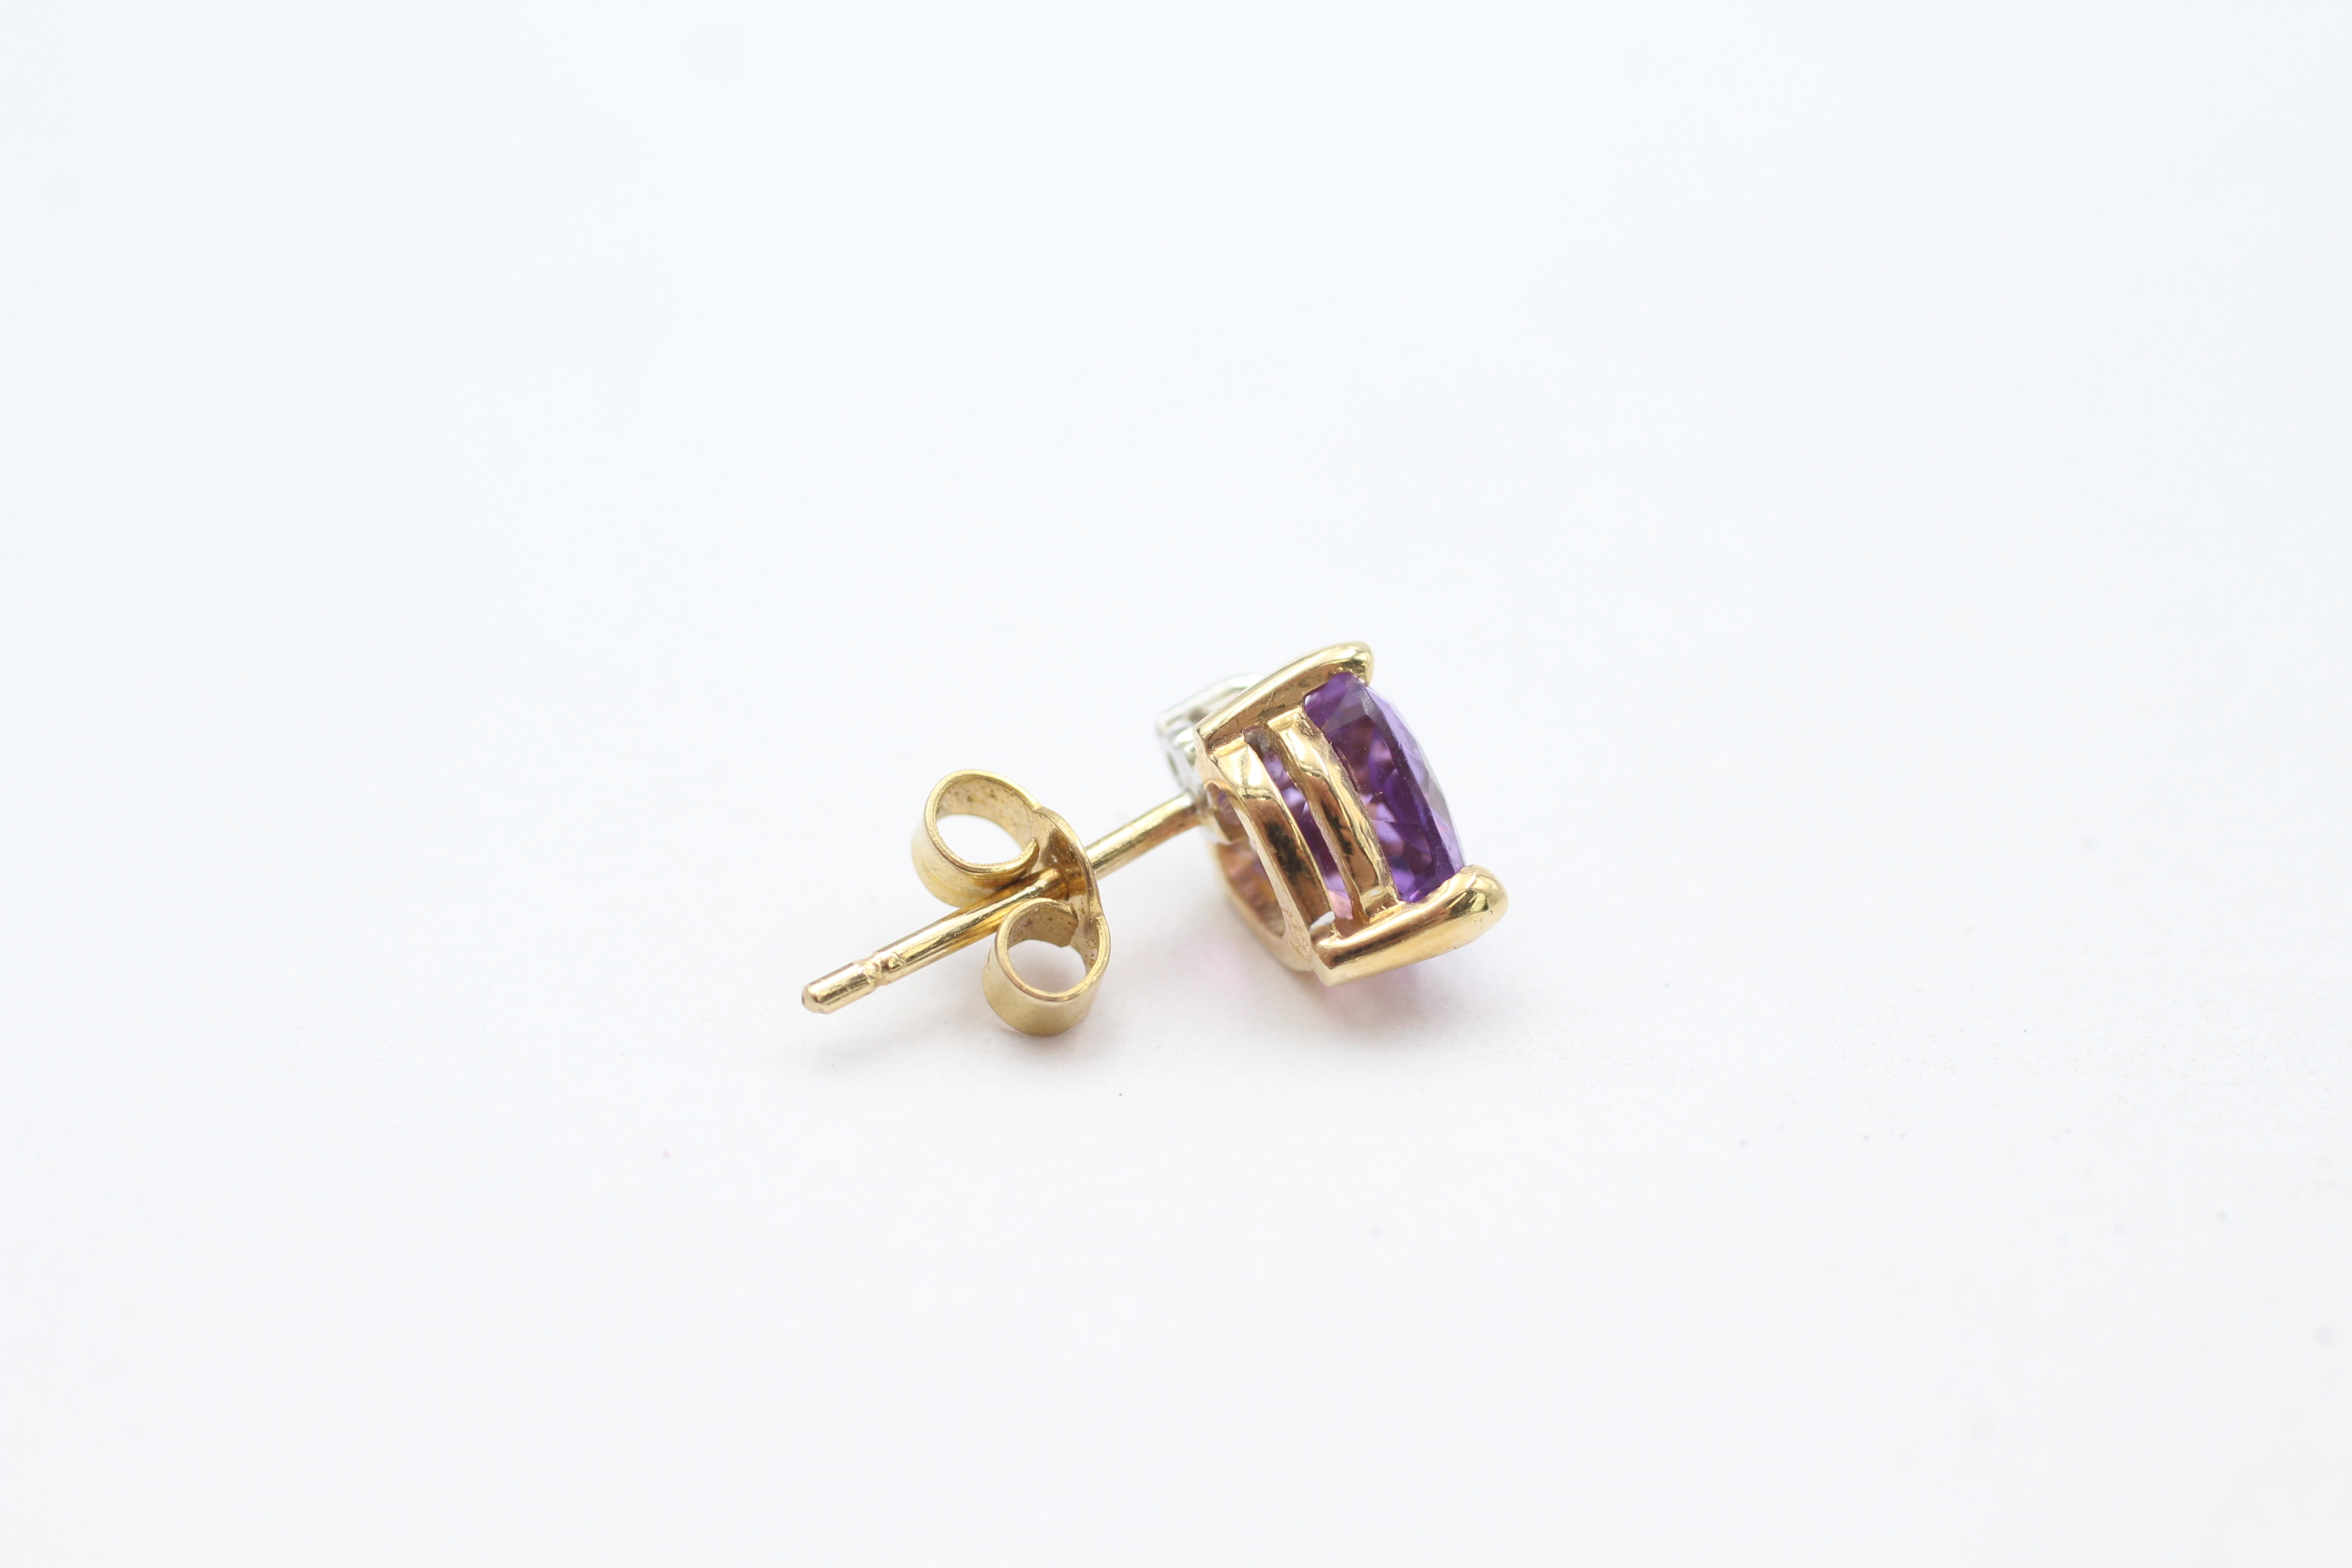 14ct gold diamond & heart amethyst stud earrings with 9ct backs - 1.5 g - Image 4 of 4